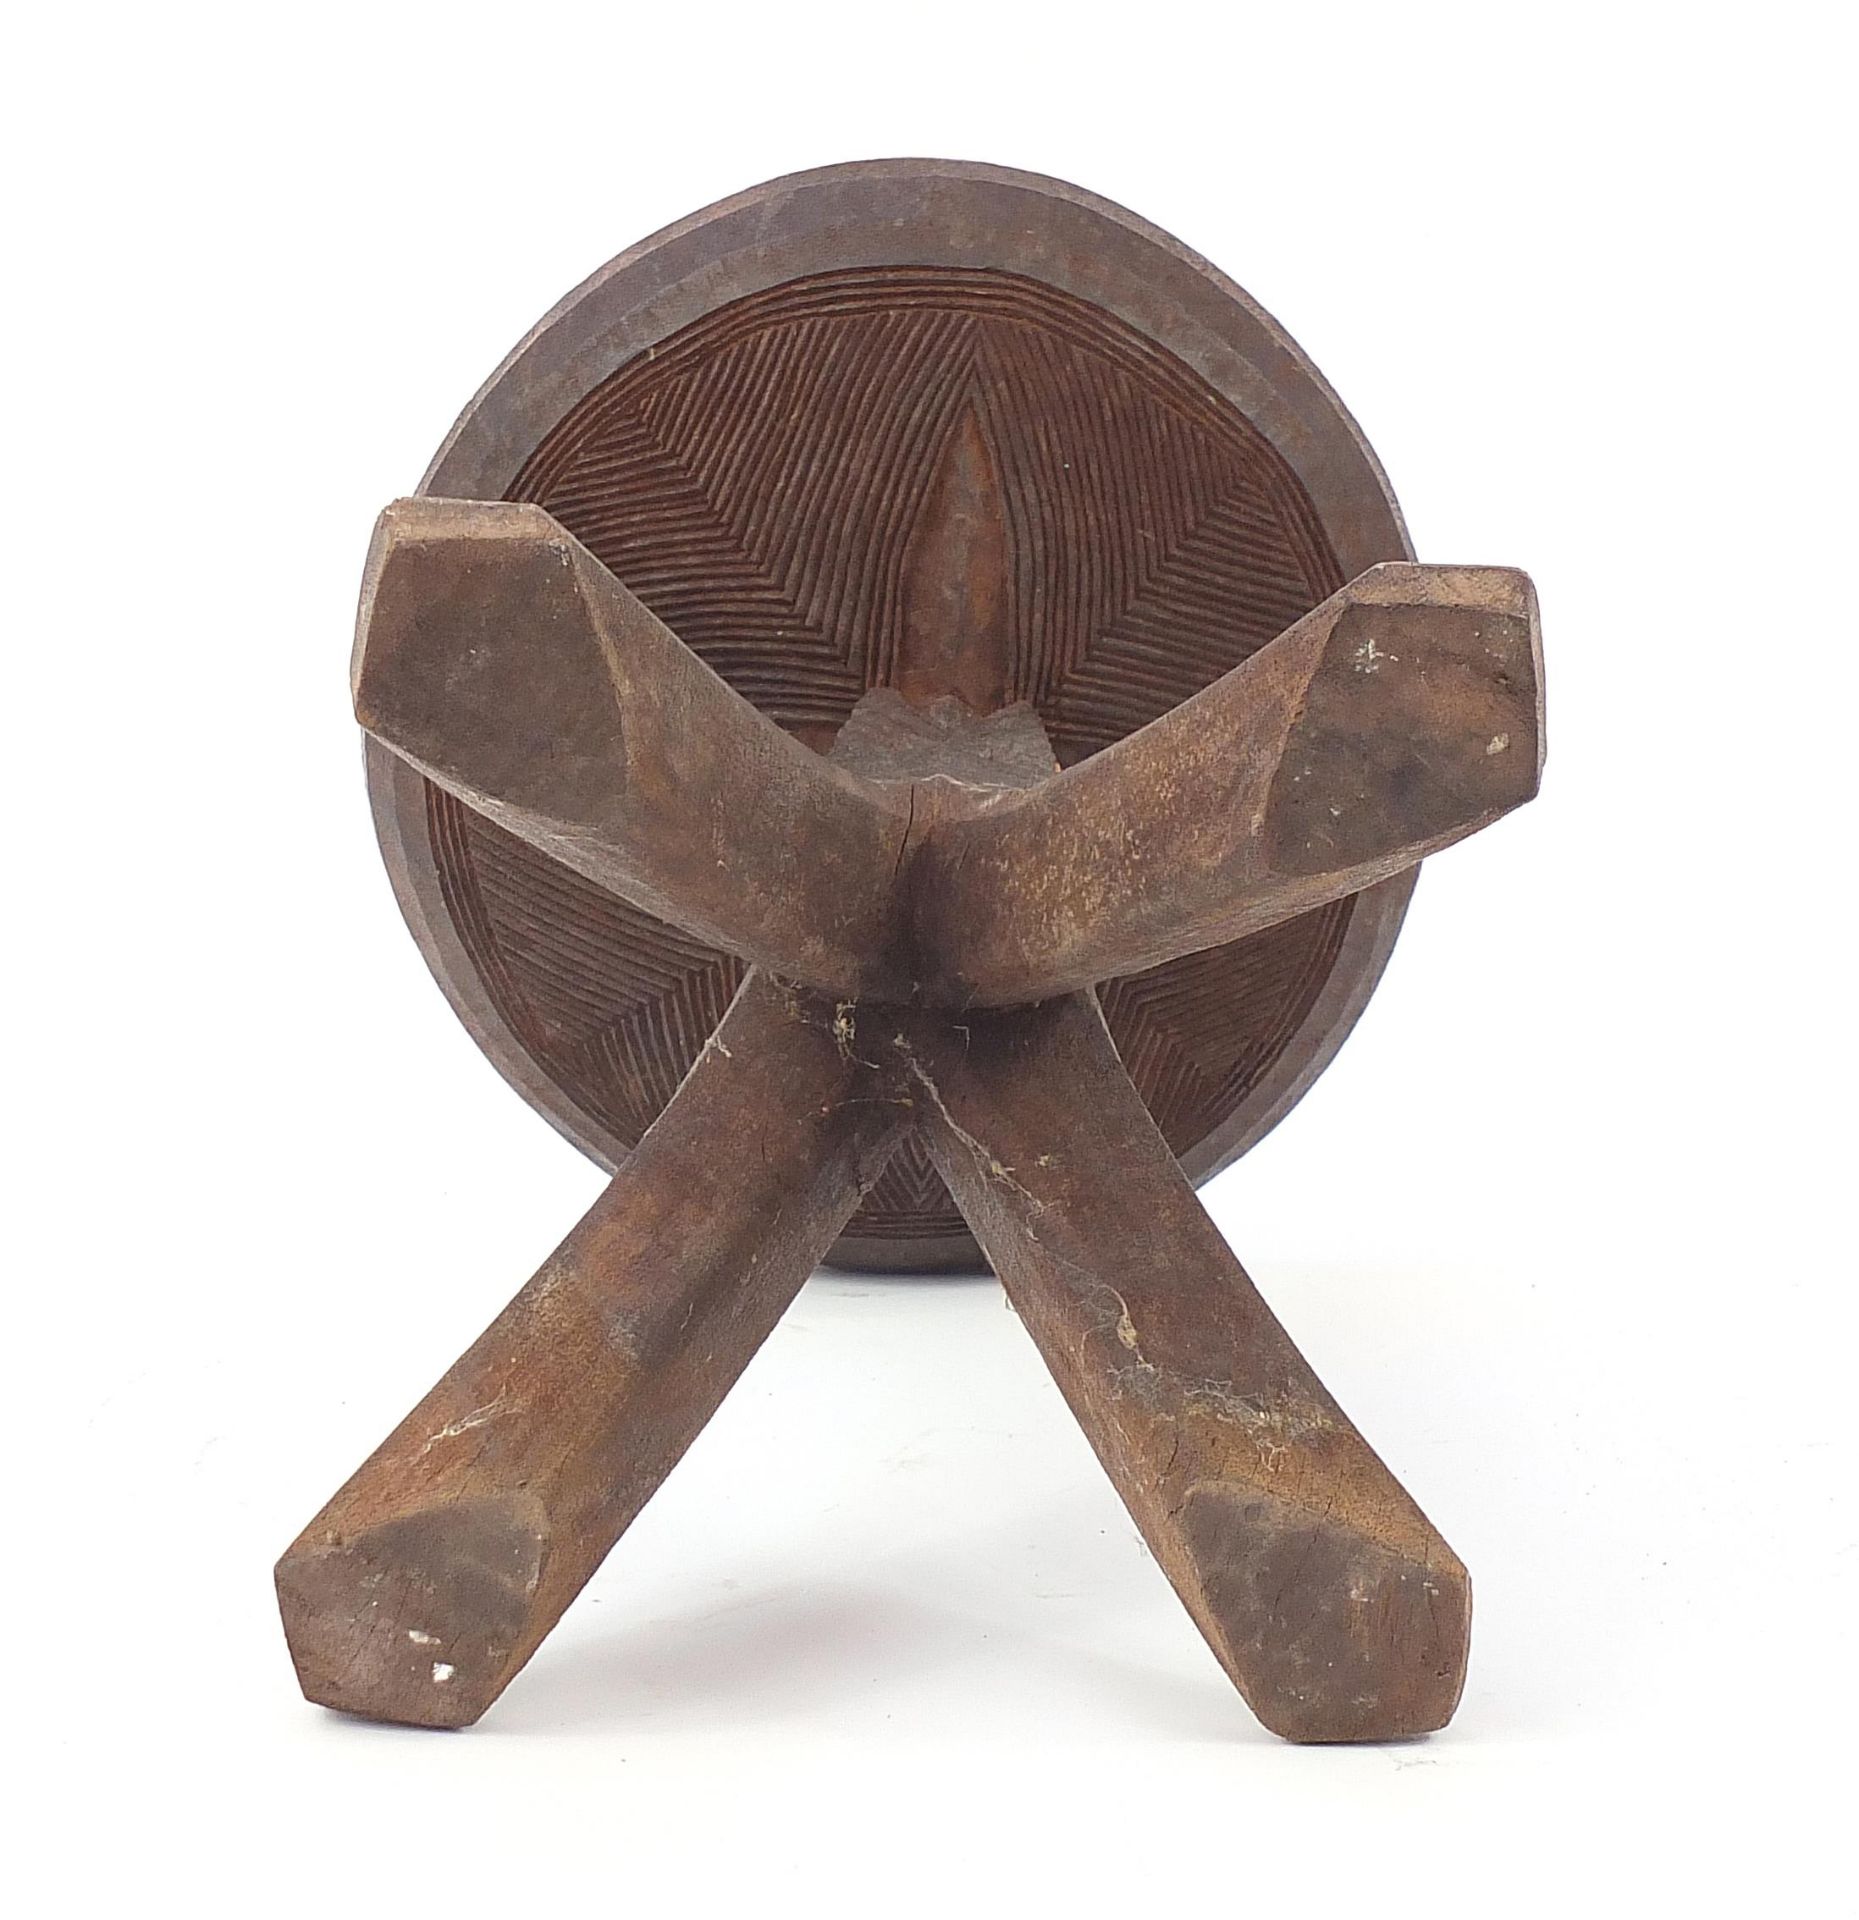 African tribal interest carved stool, 34cm high x 31cm in diameter - Image 4 of 4